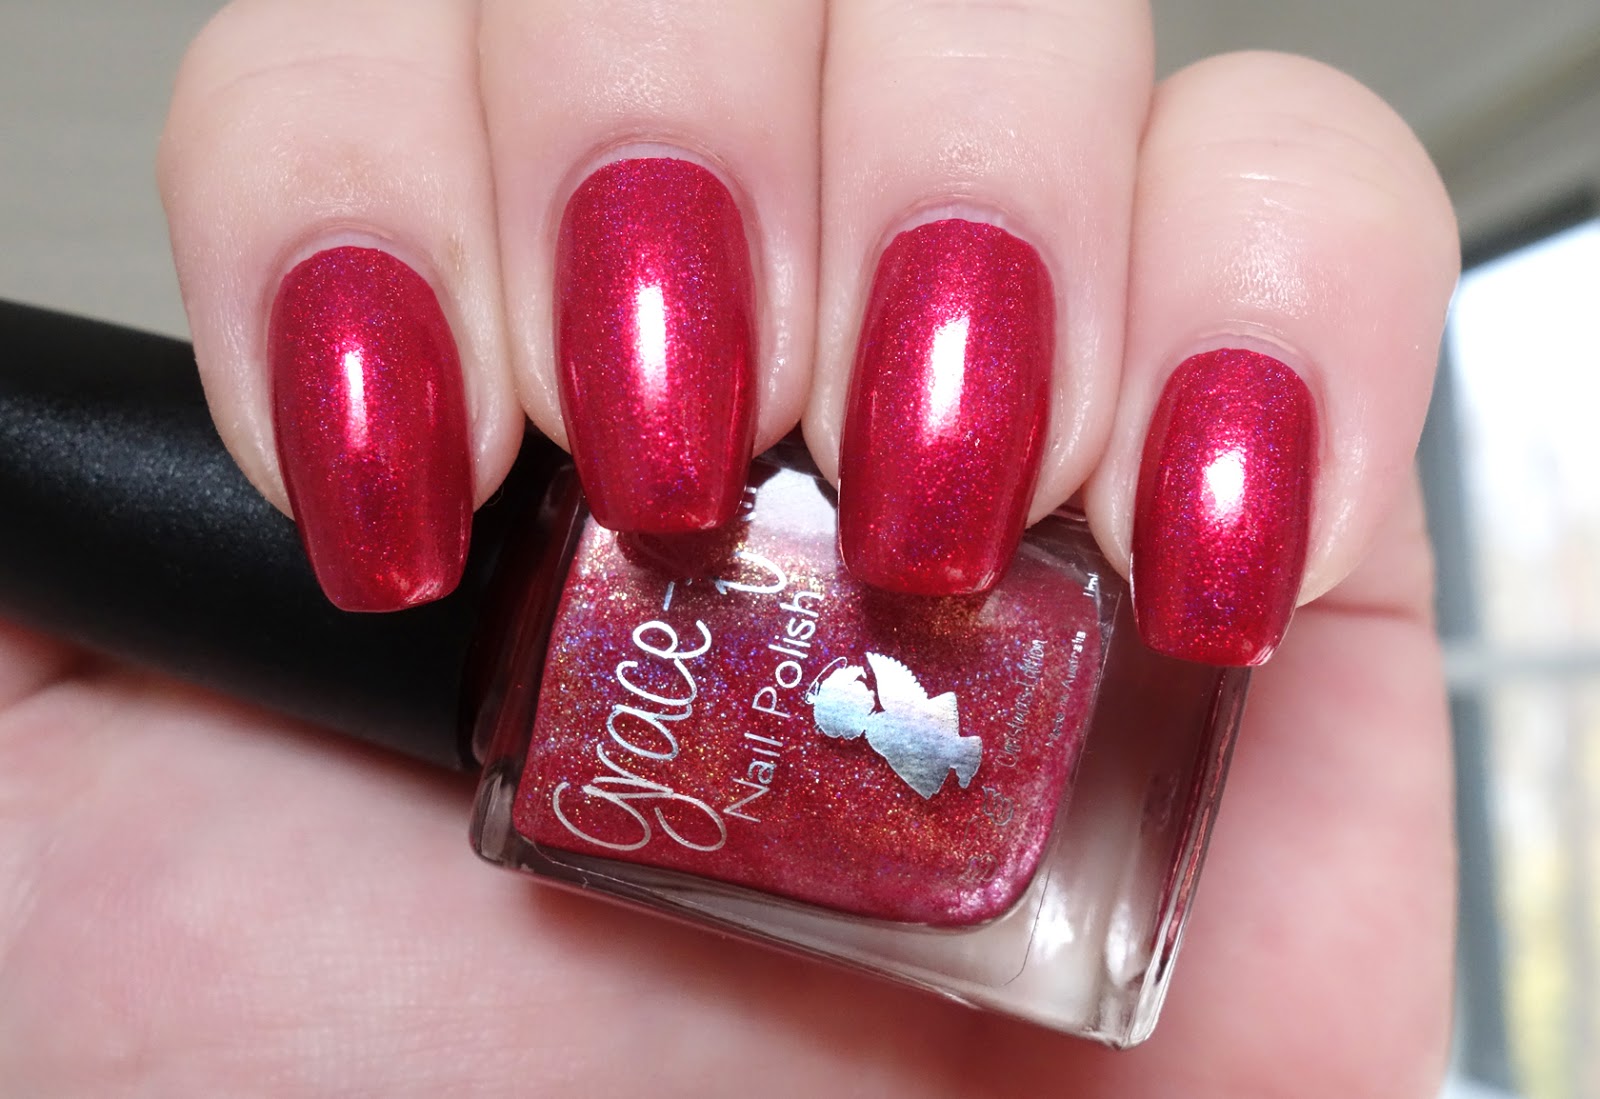 10. Miniluxe Nail Polish in "Cherry Red" - wide 8